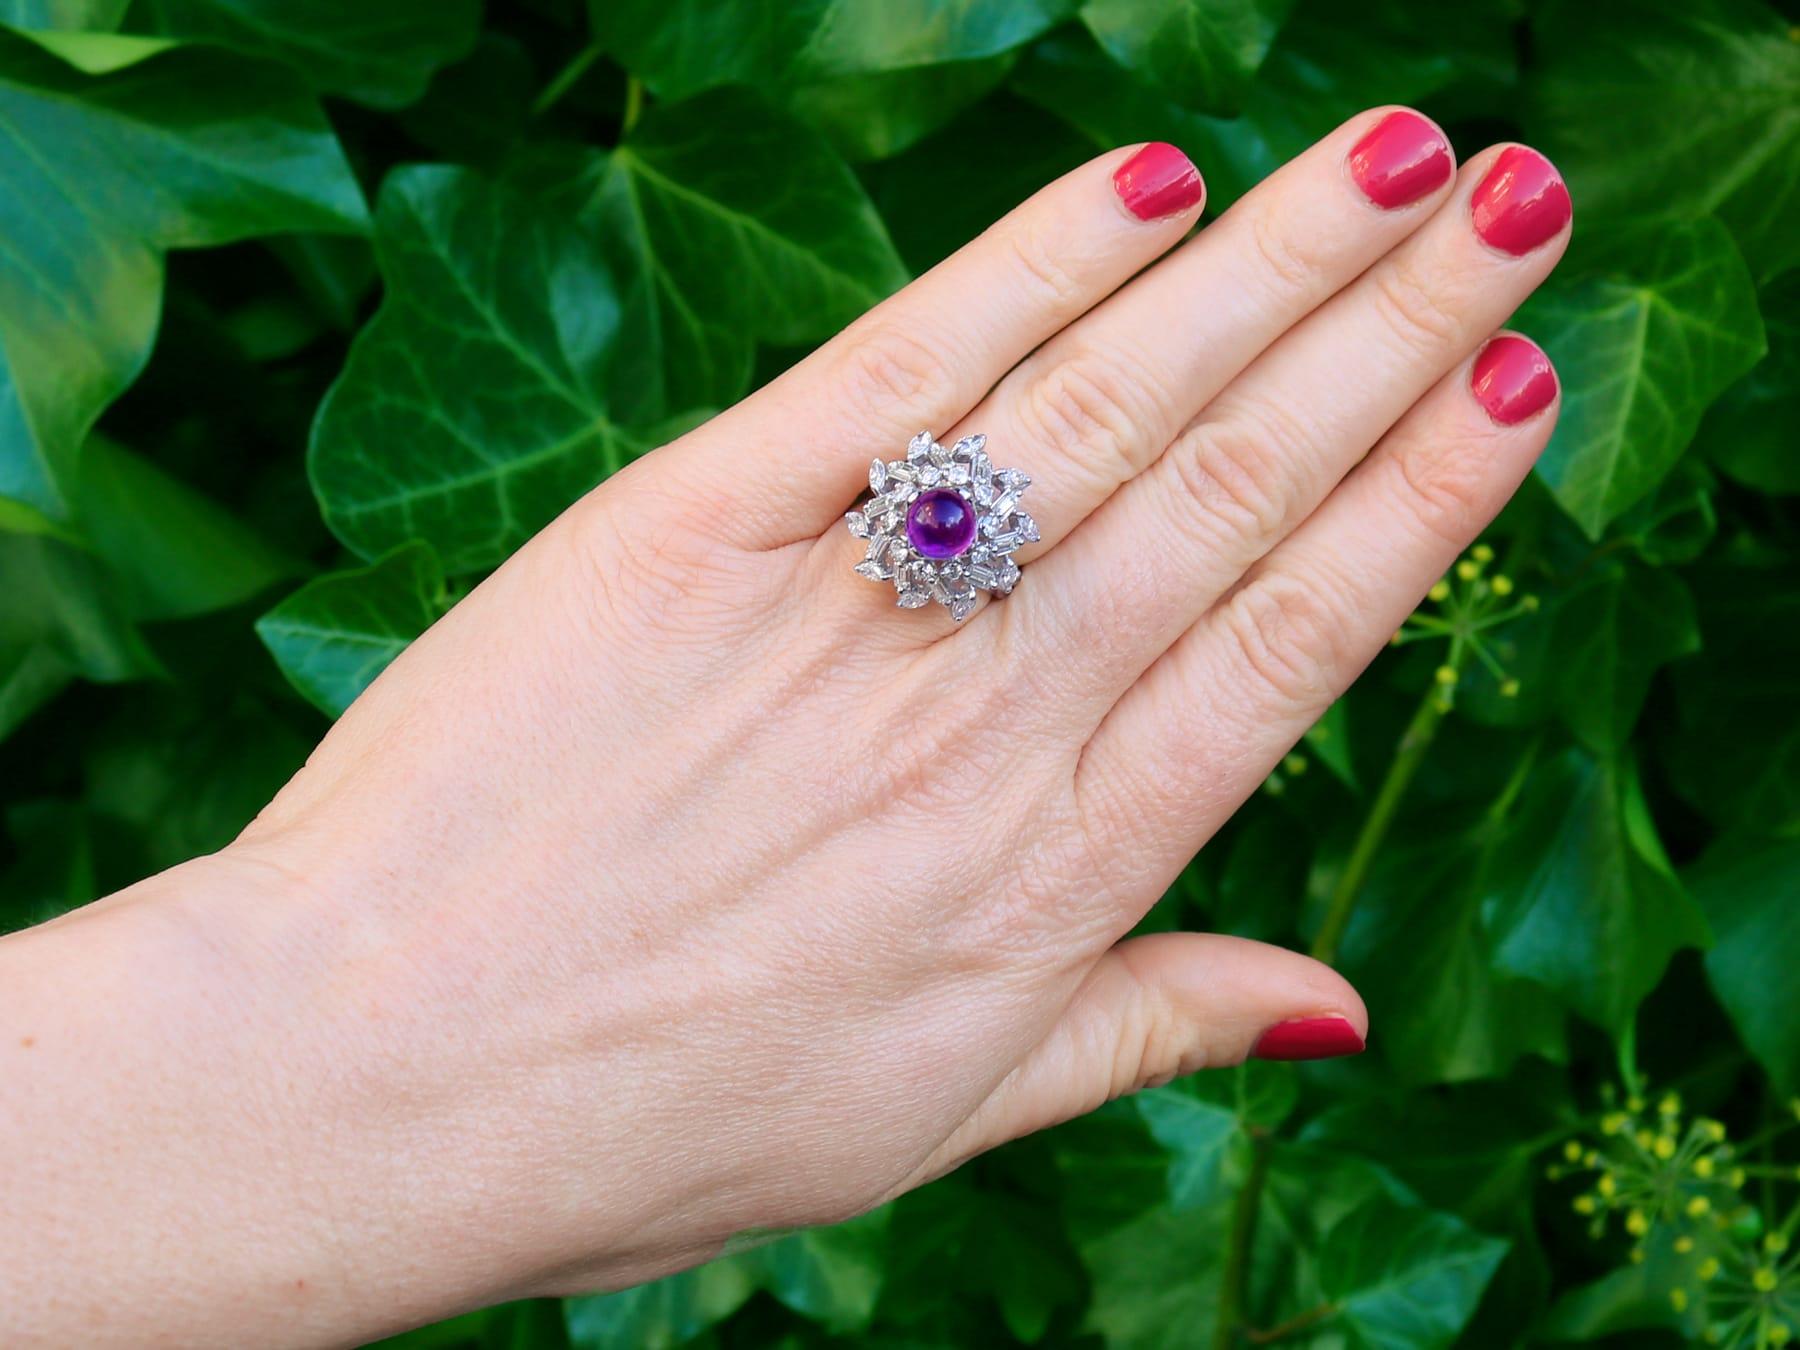 A stunning vintage 2.15 carat amethyst and 2.13 carat diamond, 18 karat white gold dress ring; part of our diverse vintage jewelry and estate jewelry collections.

This stunning vintage amethyst and diamond ring has been crafted in 18k white gold